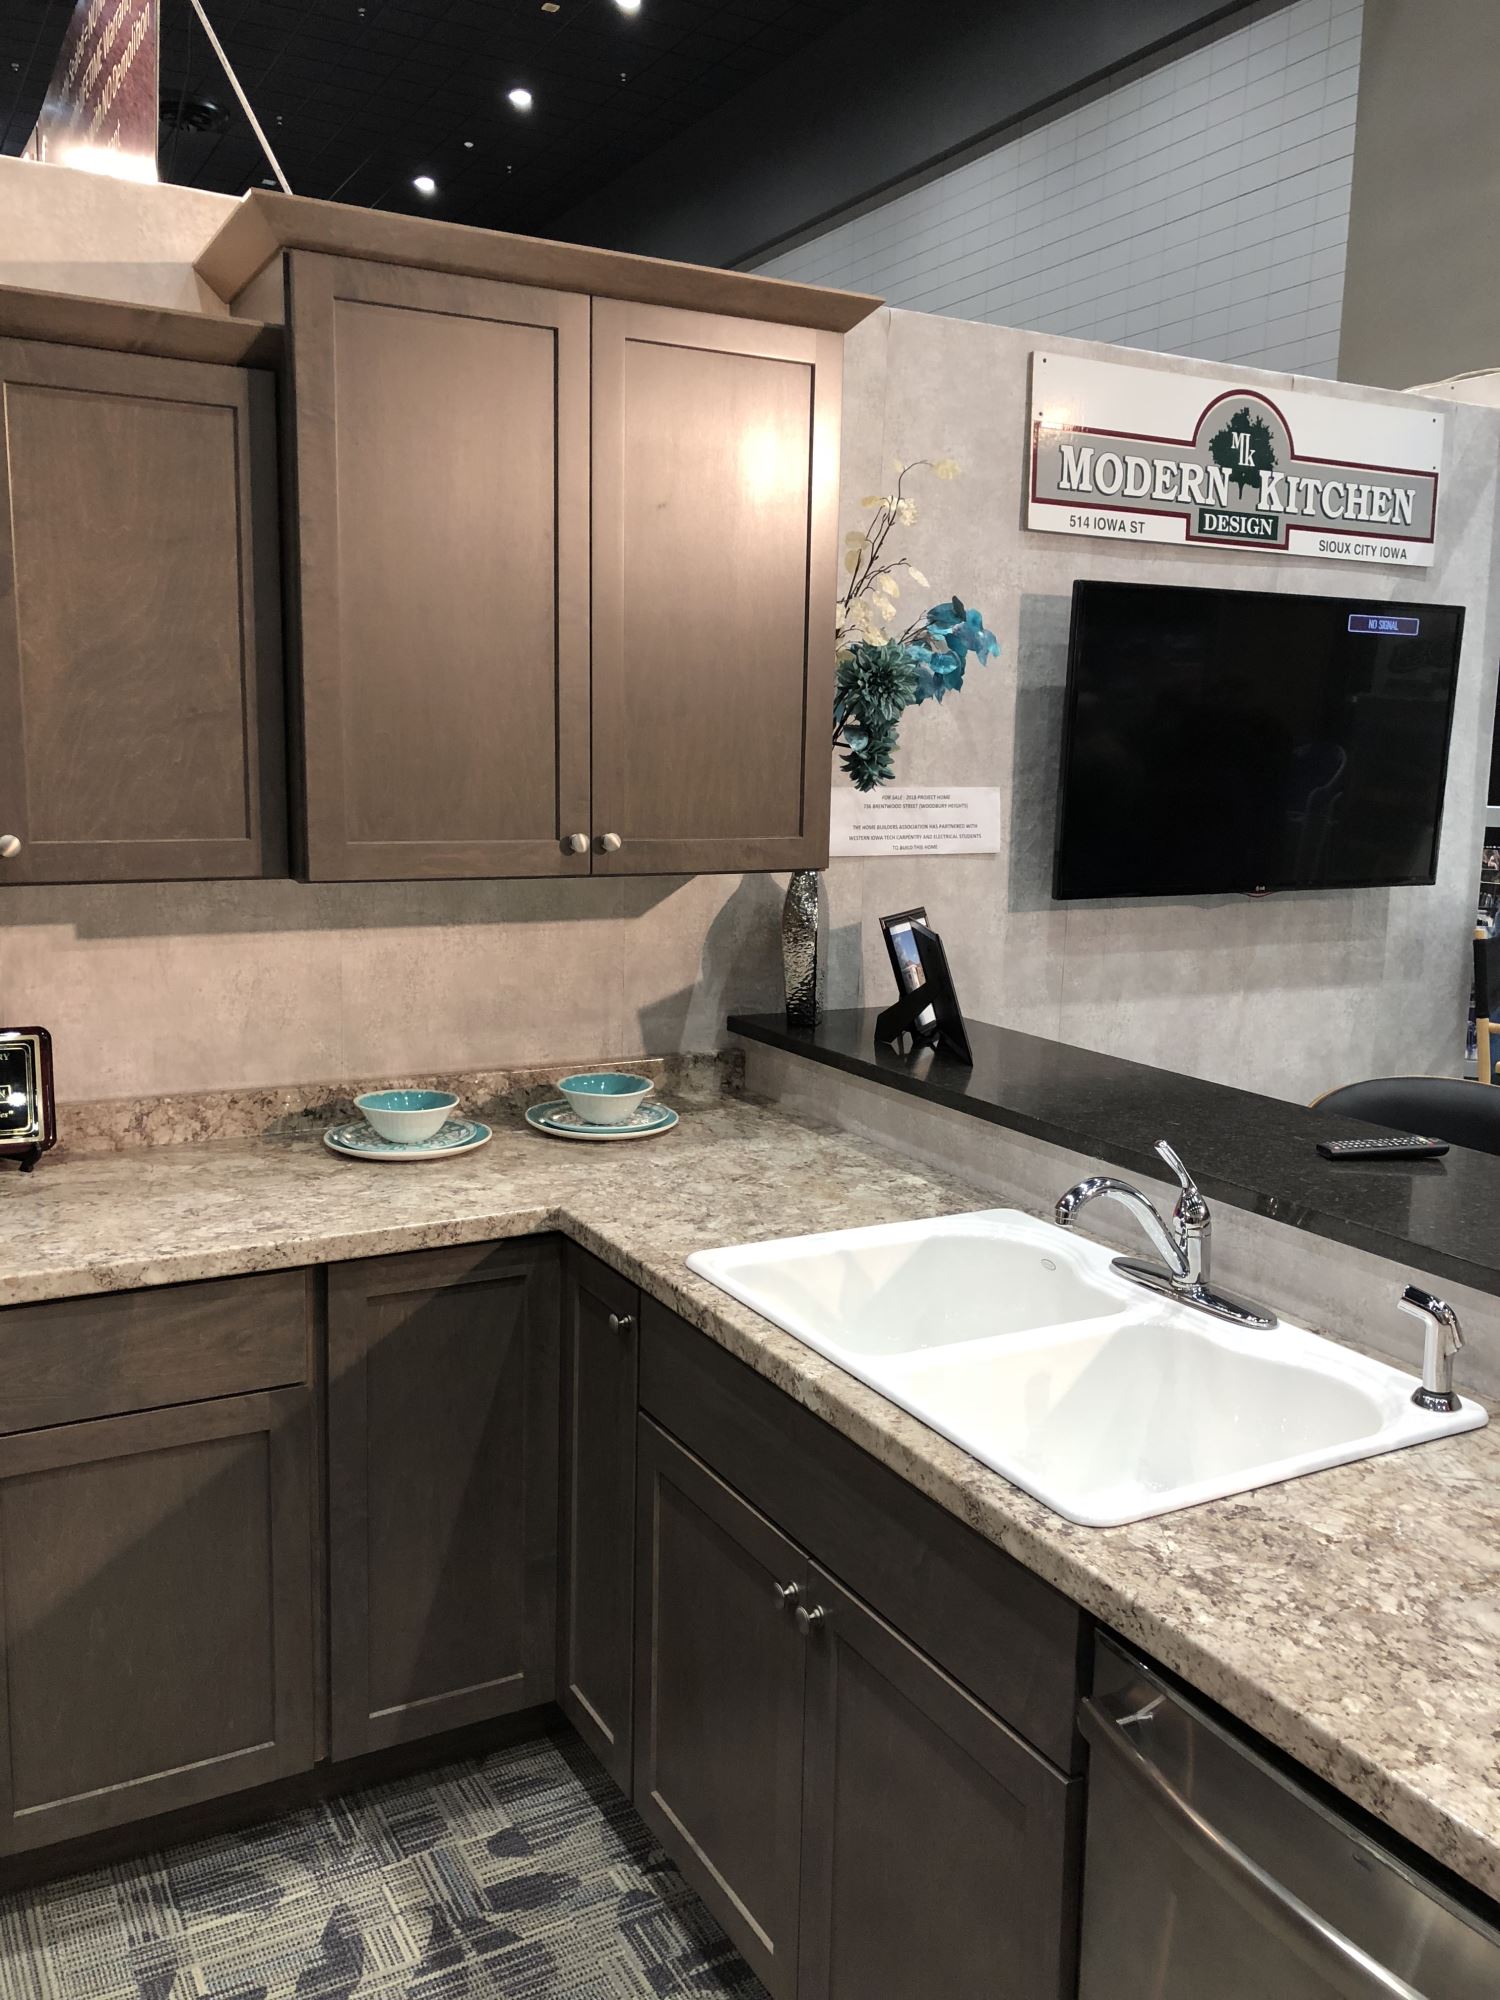 Modern Kitchen Design Displays at Sioux City, IA Home Show - VT